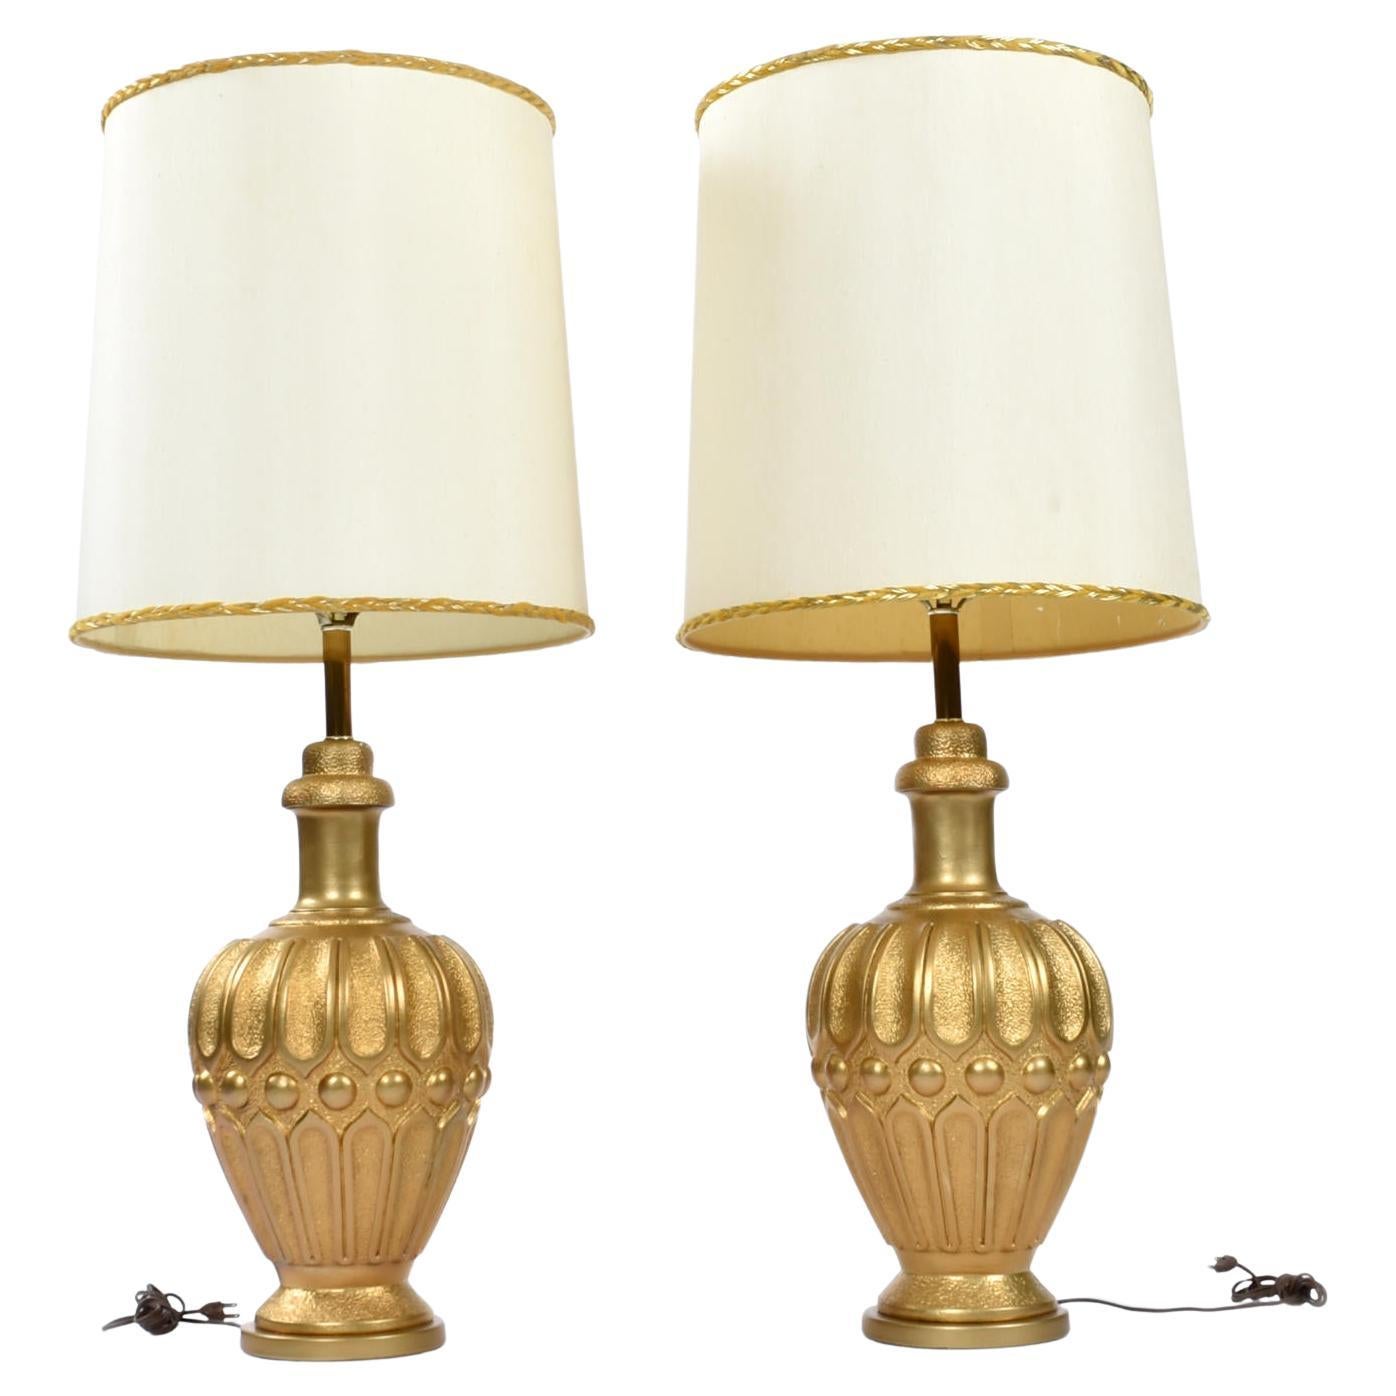 The shades pictured are NOT included with purchase. 

Pair of large Mid-Century Modern gold colored Chalkware genie lamps. The lamps have a regal Mediterranean or even Middle Eastern feel. The lamps are shaped like urns with textured channeled